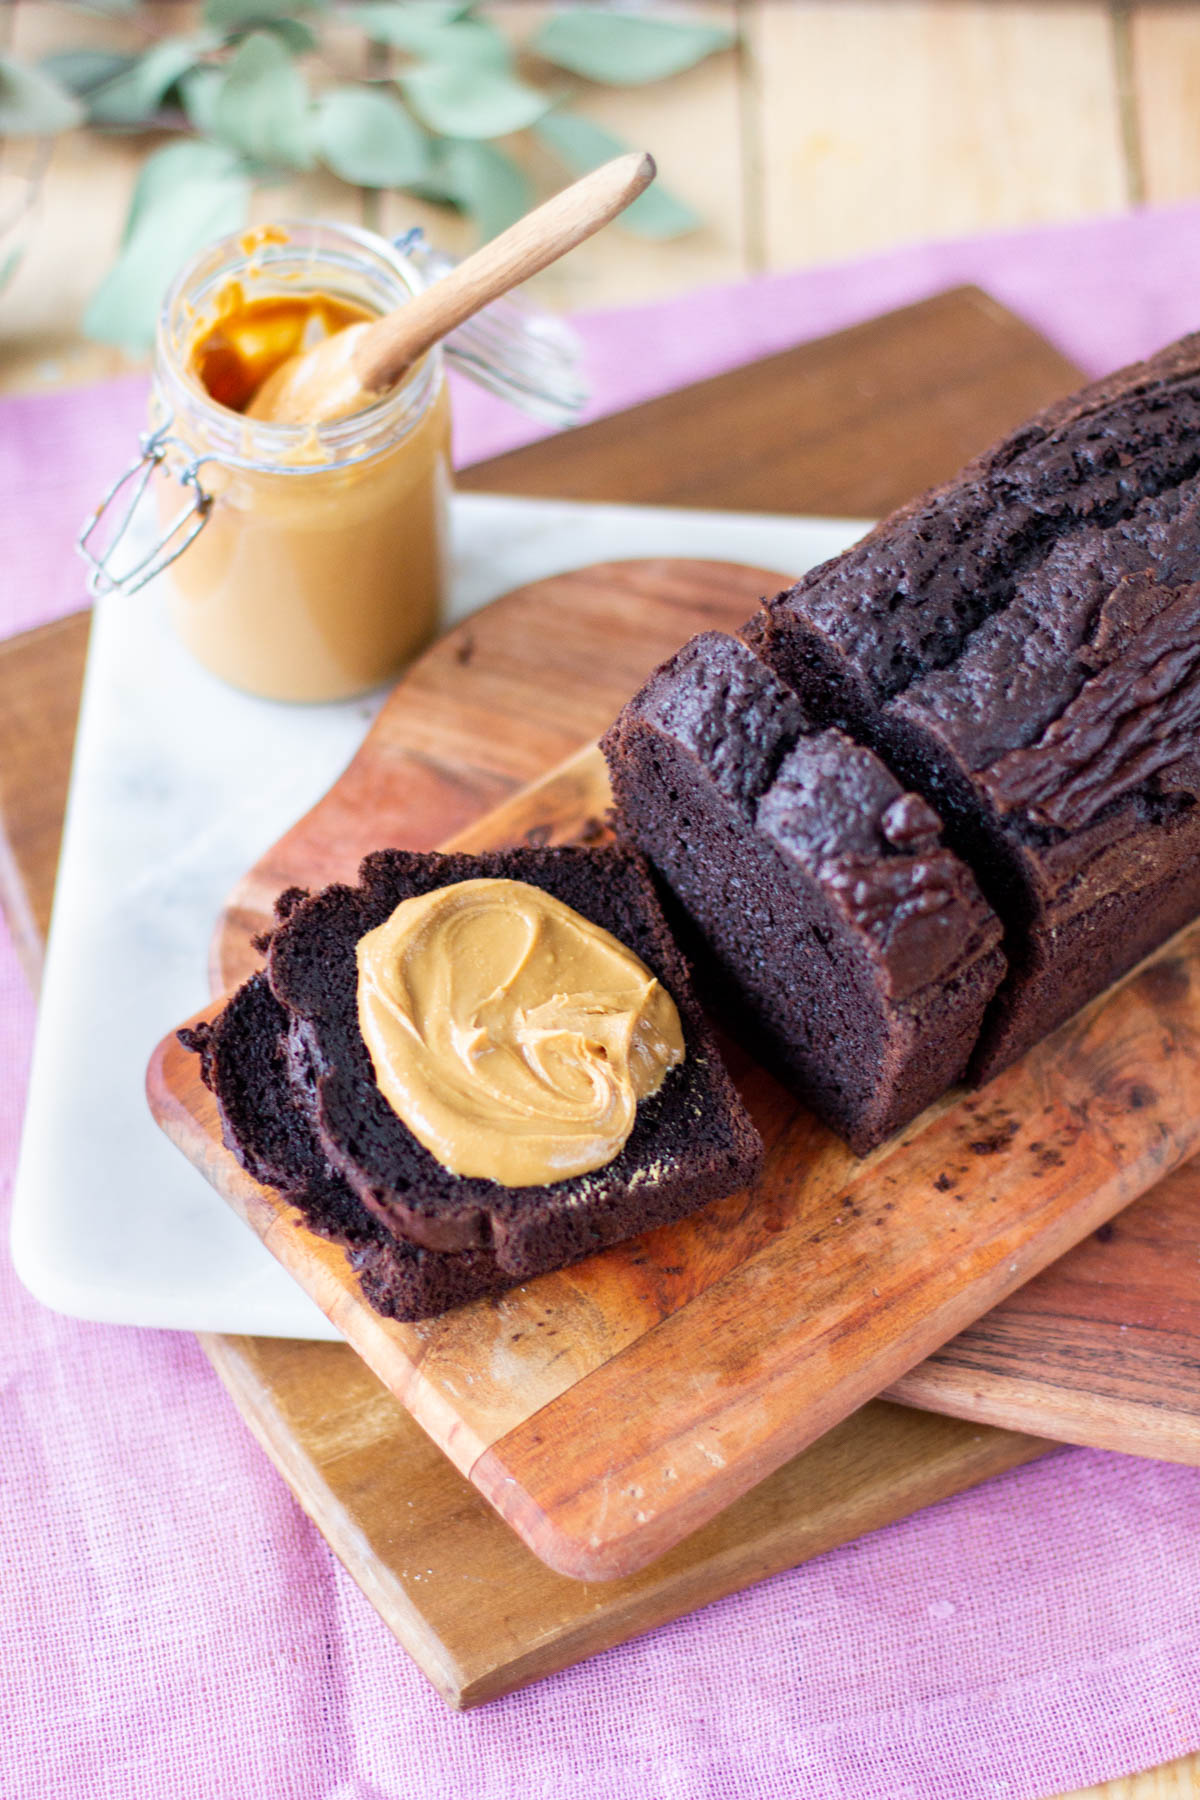 delicious chocolate cake with peanut butter spread